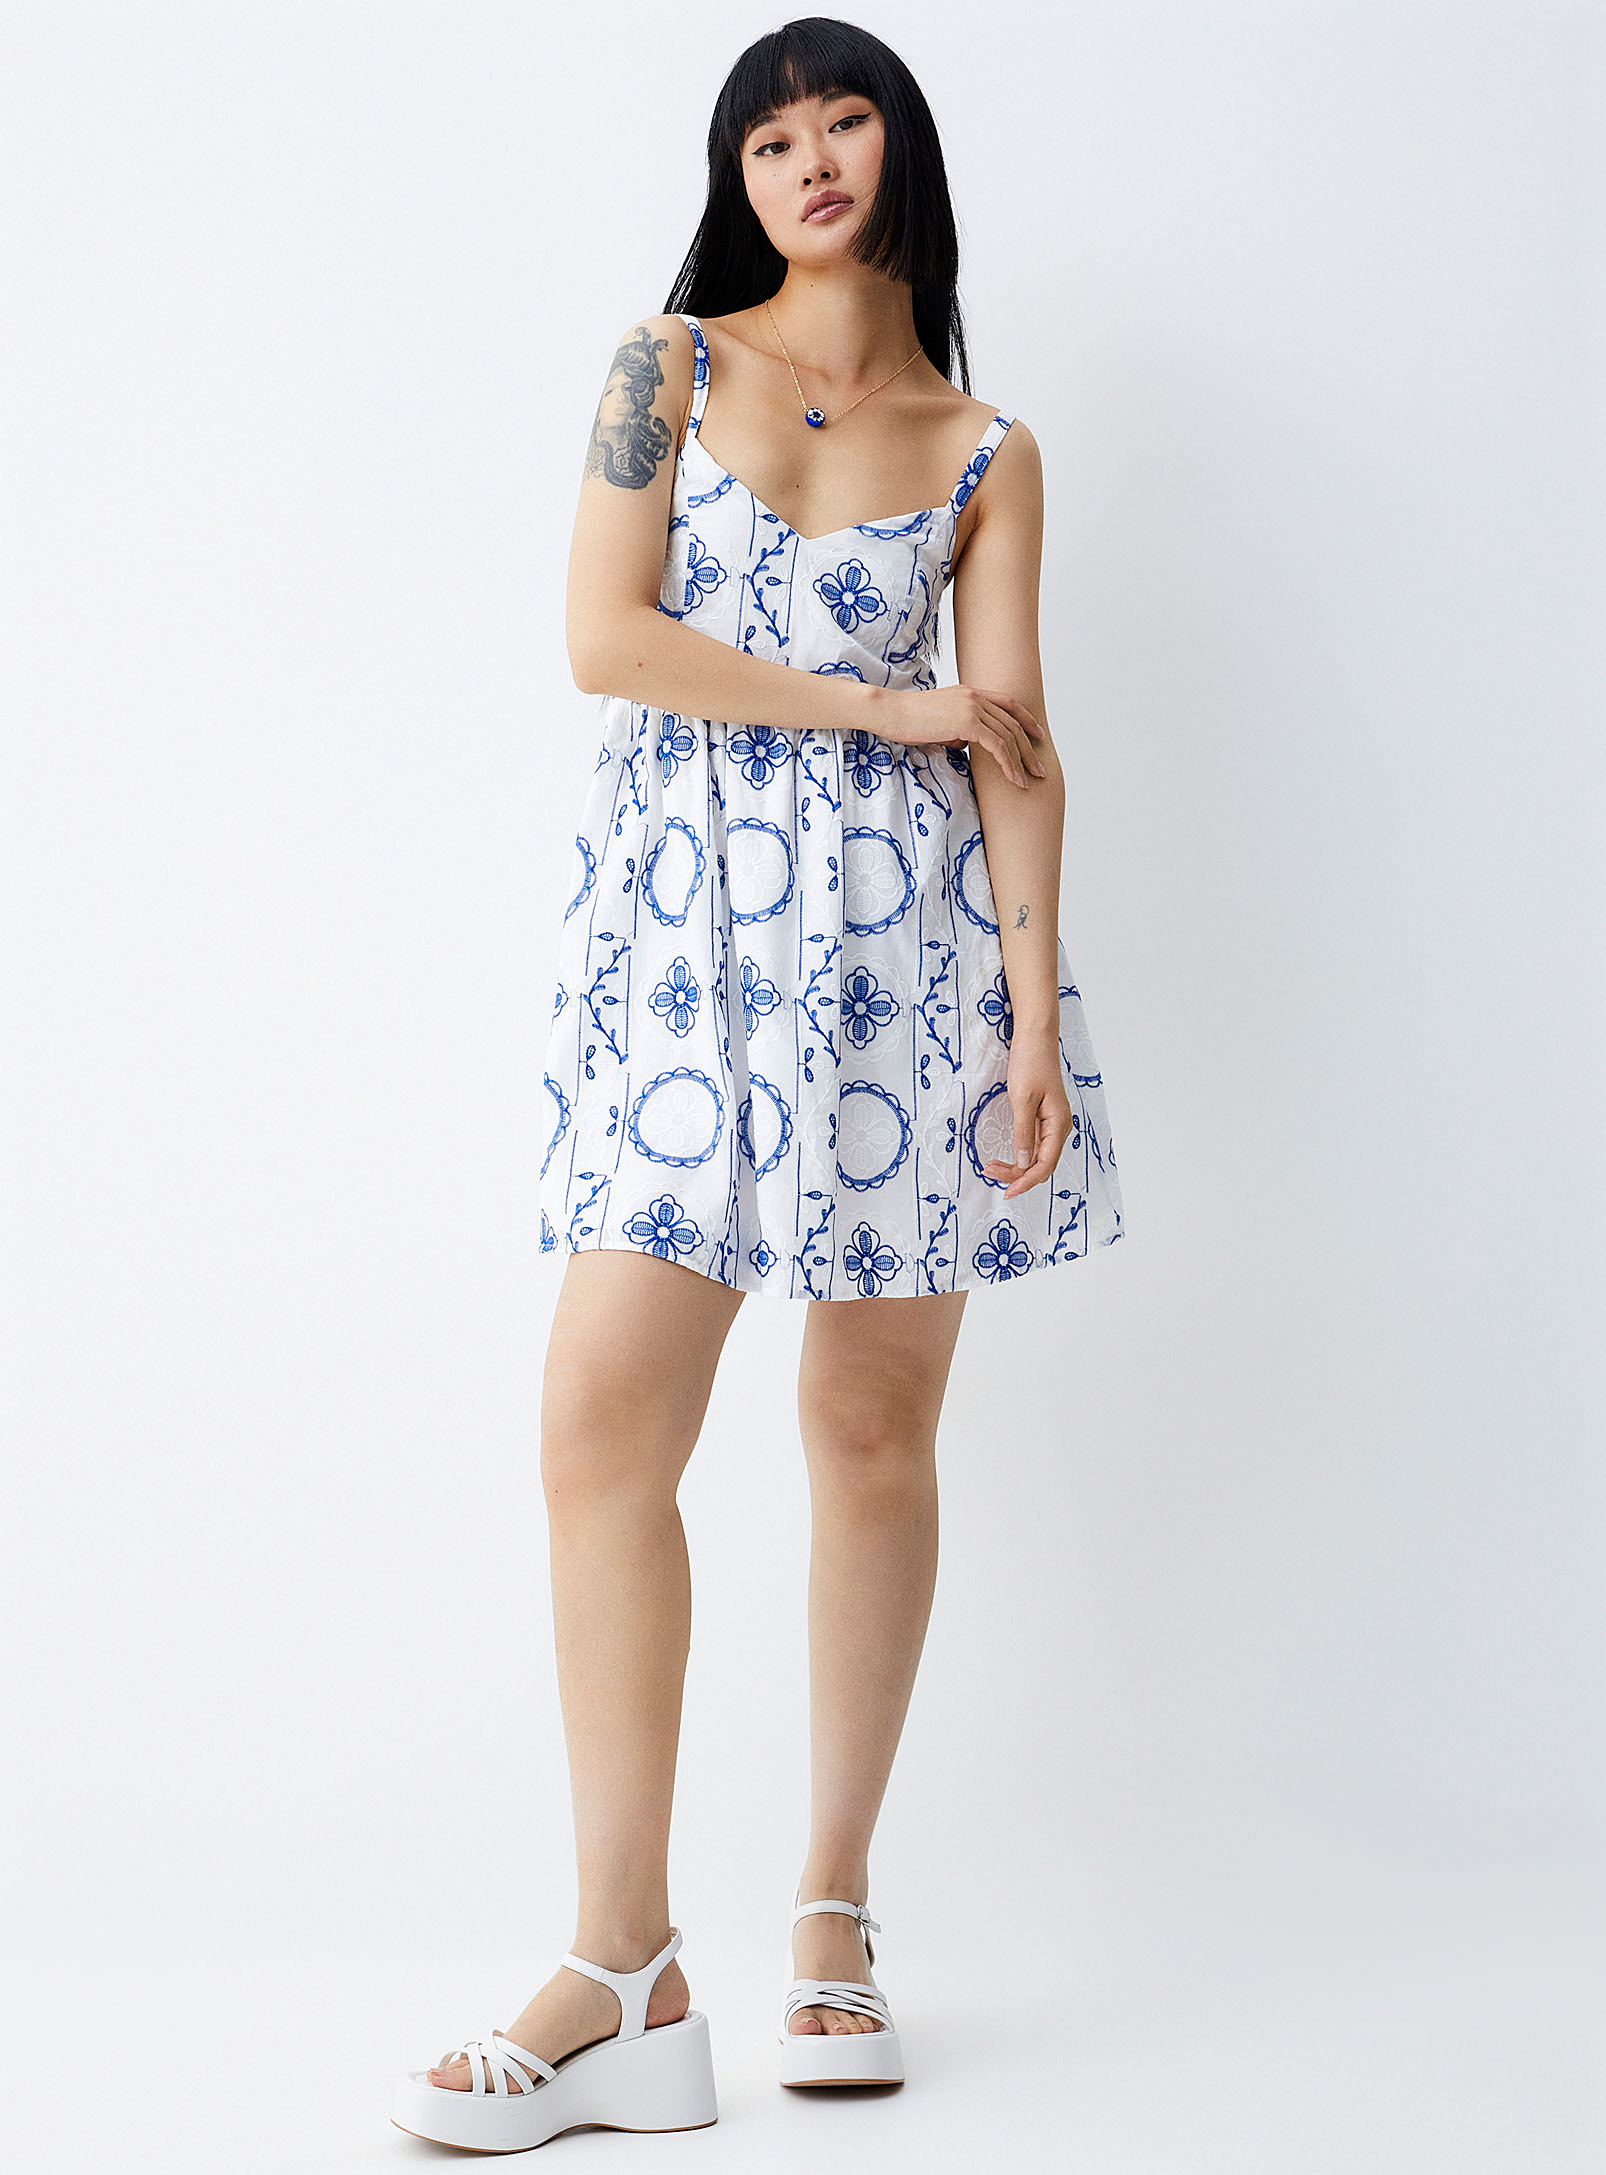 Only - Women's Blue flower embroidery dress